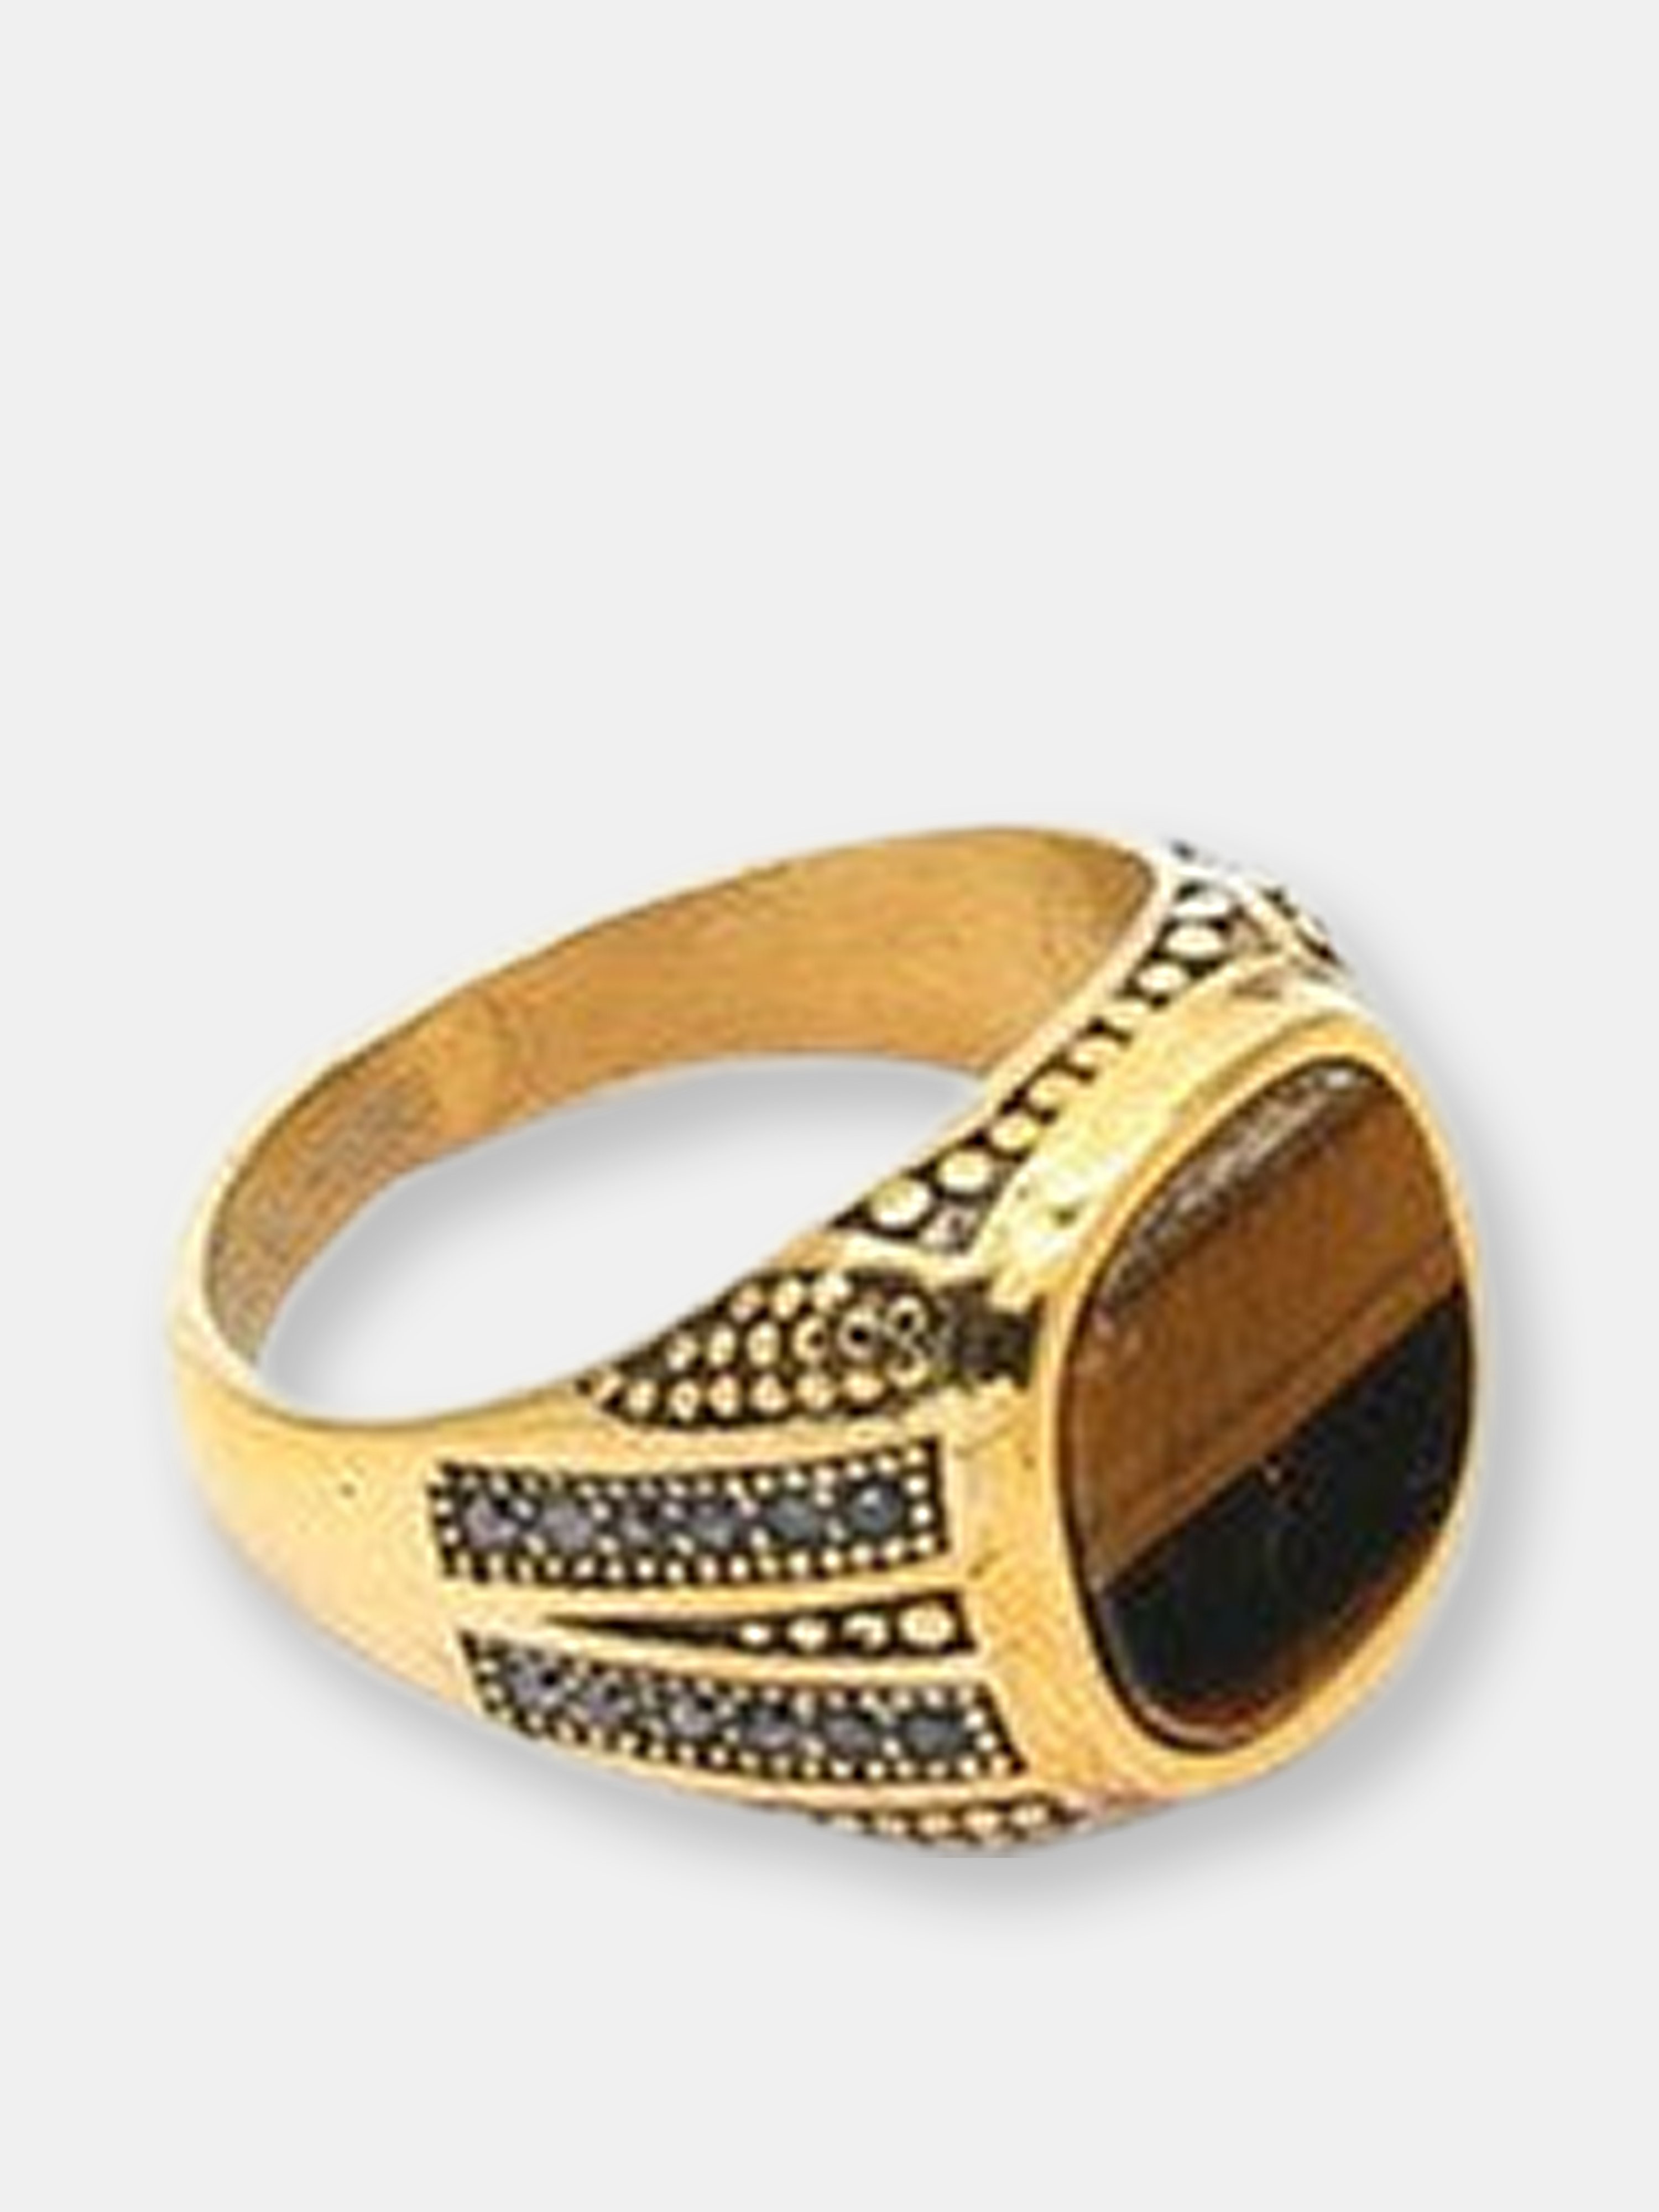 Hmy Jewelry Steeltime Tiger Eye Statement Ring In Gold